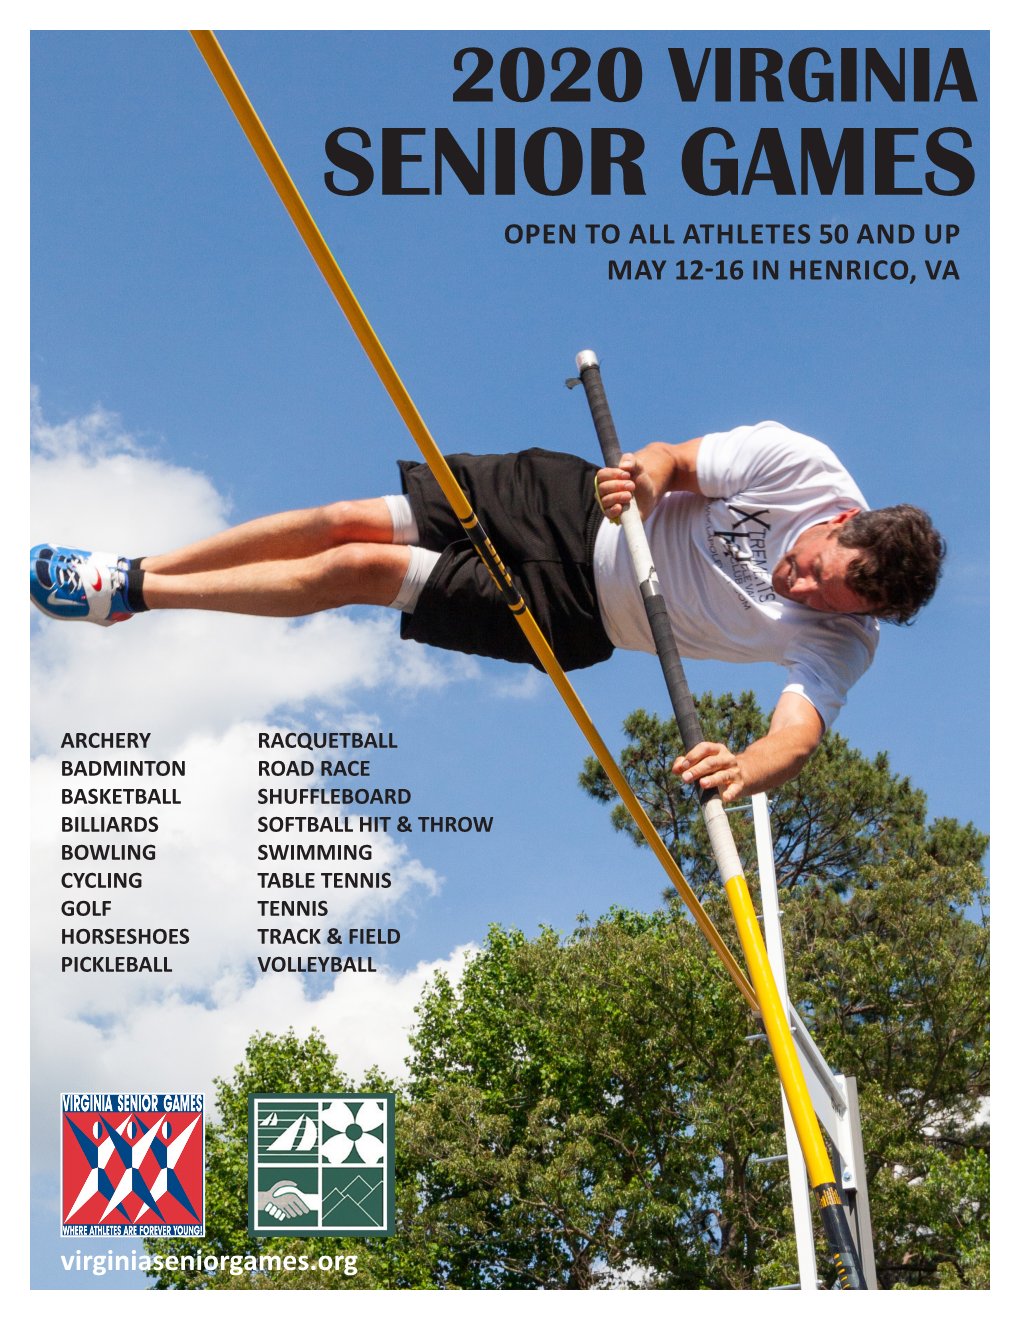 Senior Games Open to All Athletes 50 and up May 12-16 in Henrico, Va